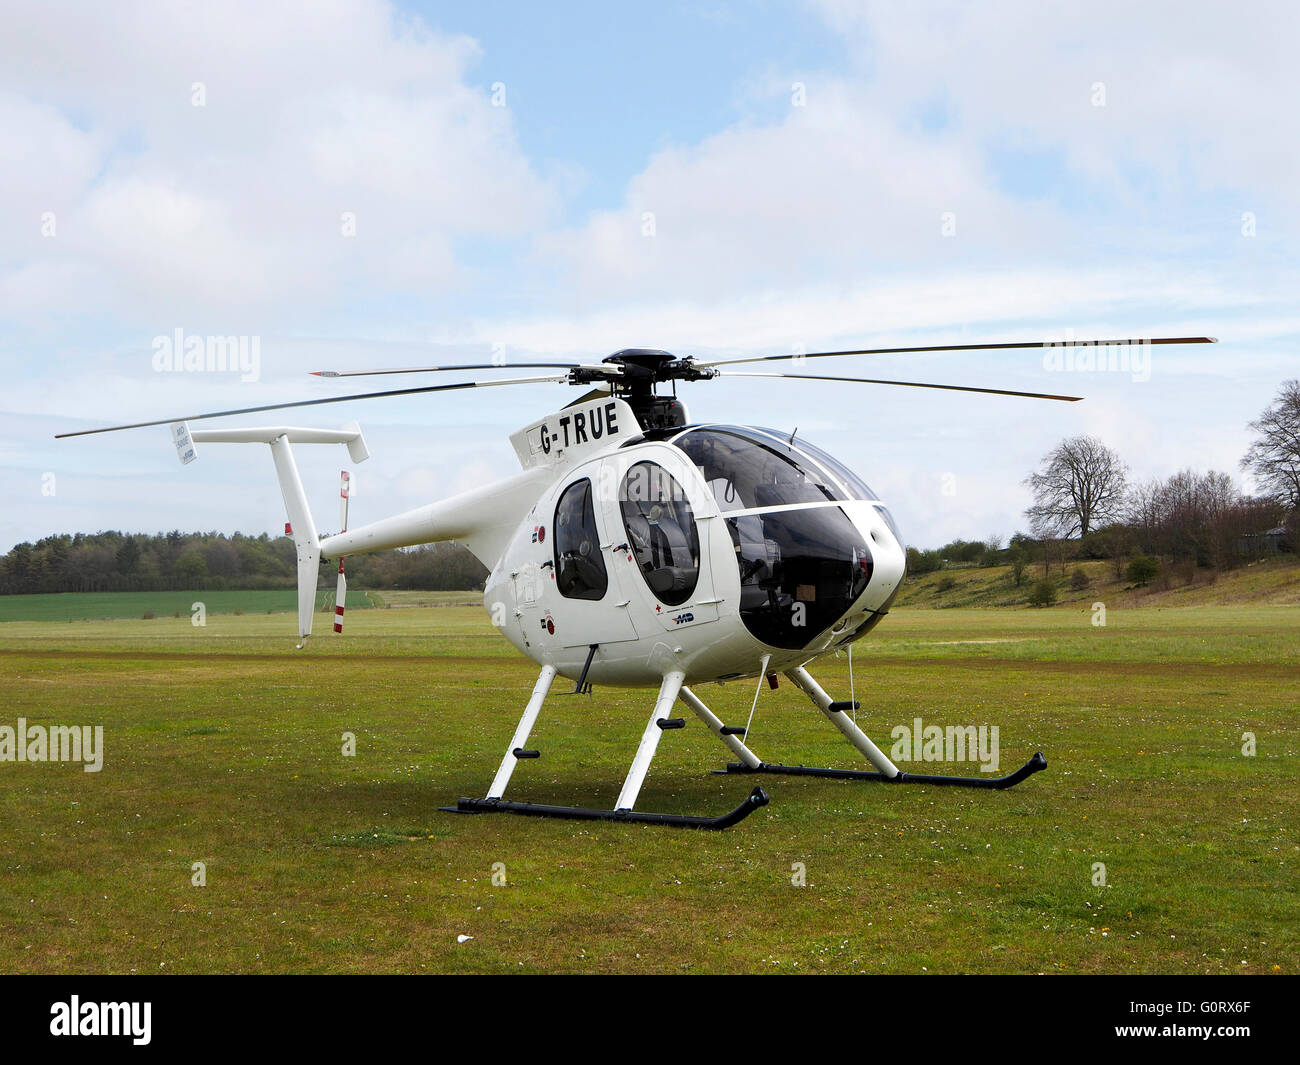 McDonnell Douglas MD-500E jet powered light utility helicopter G-TRUE on teh grounds at Popham Airfield, Hampshire Stock Photo